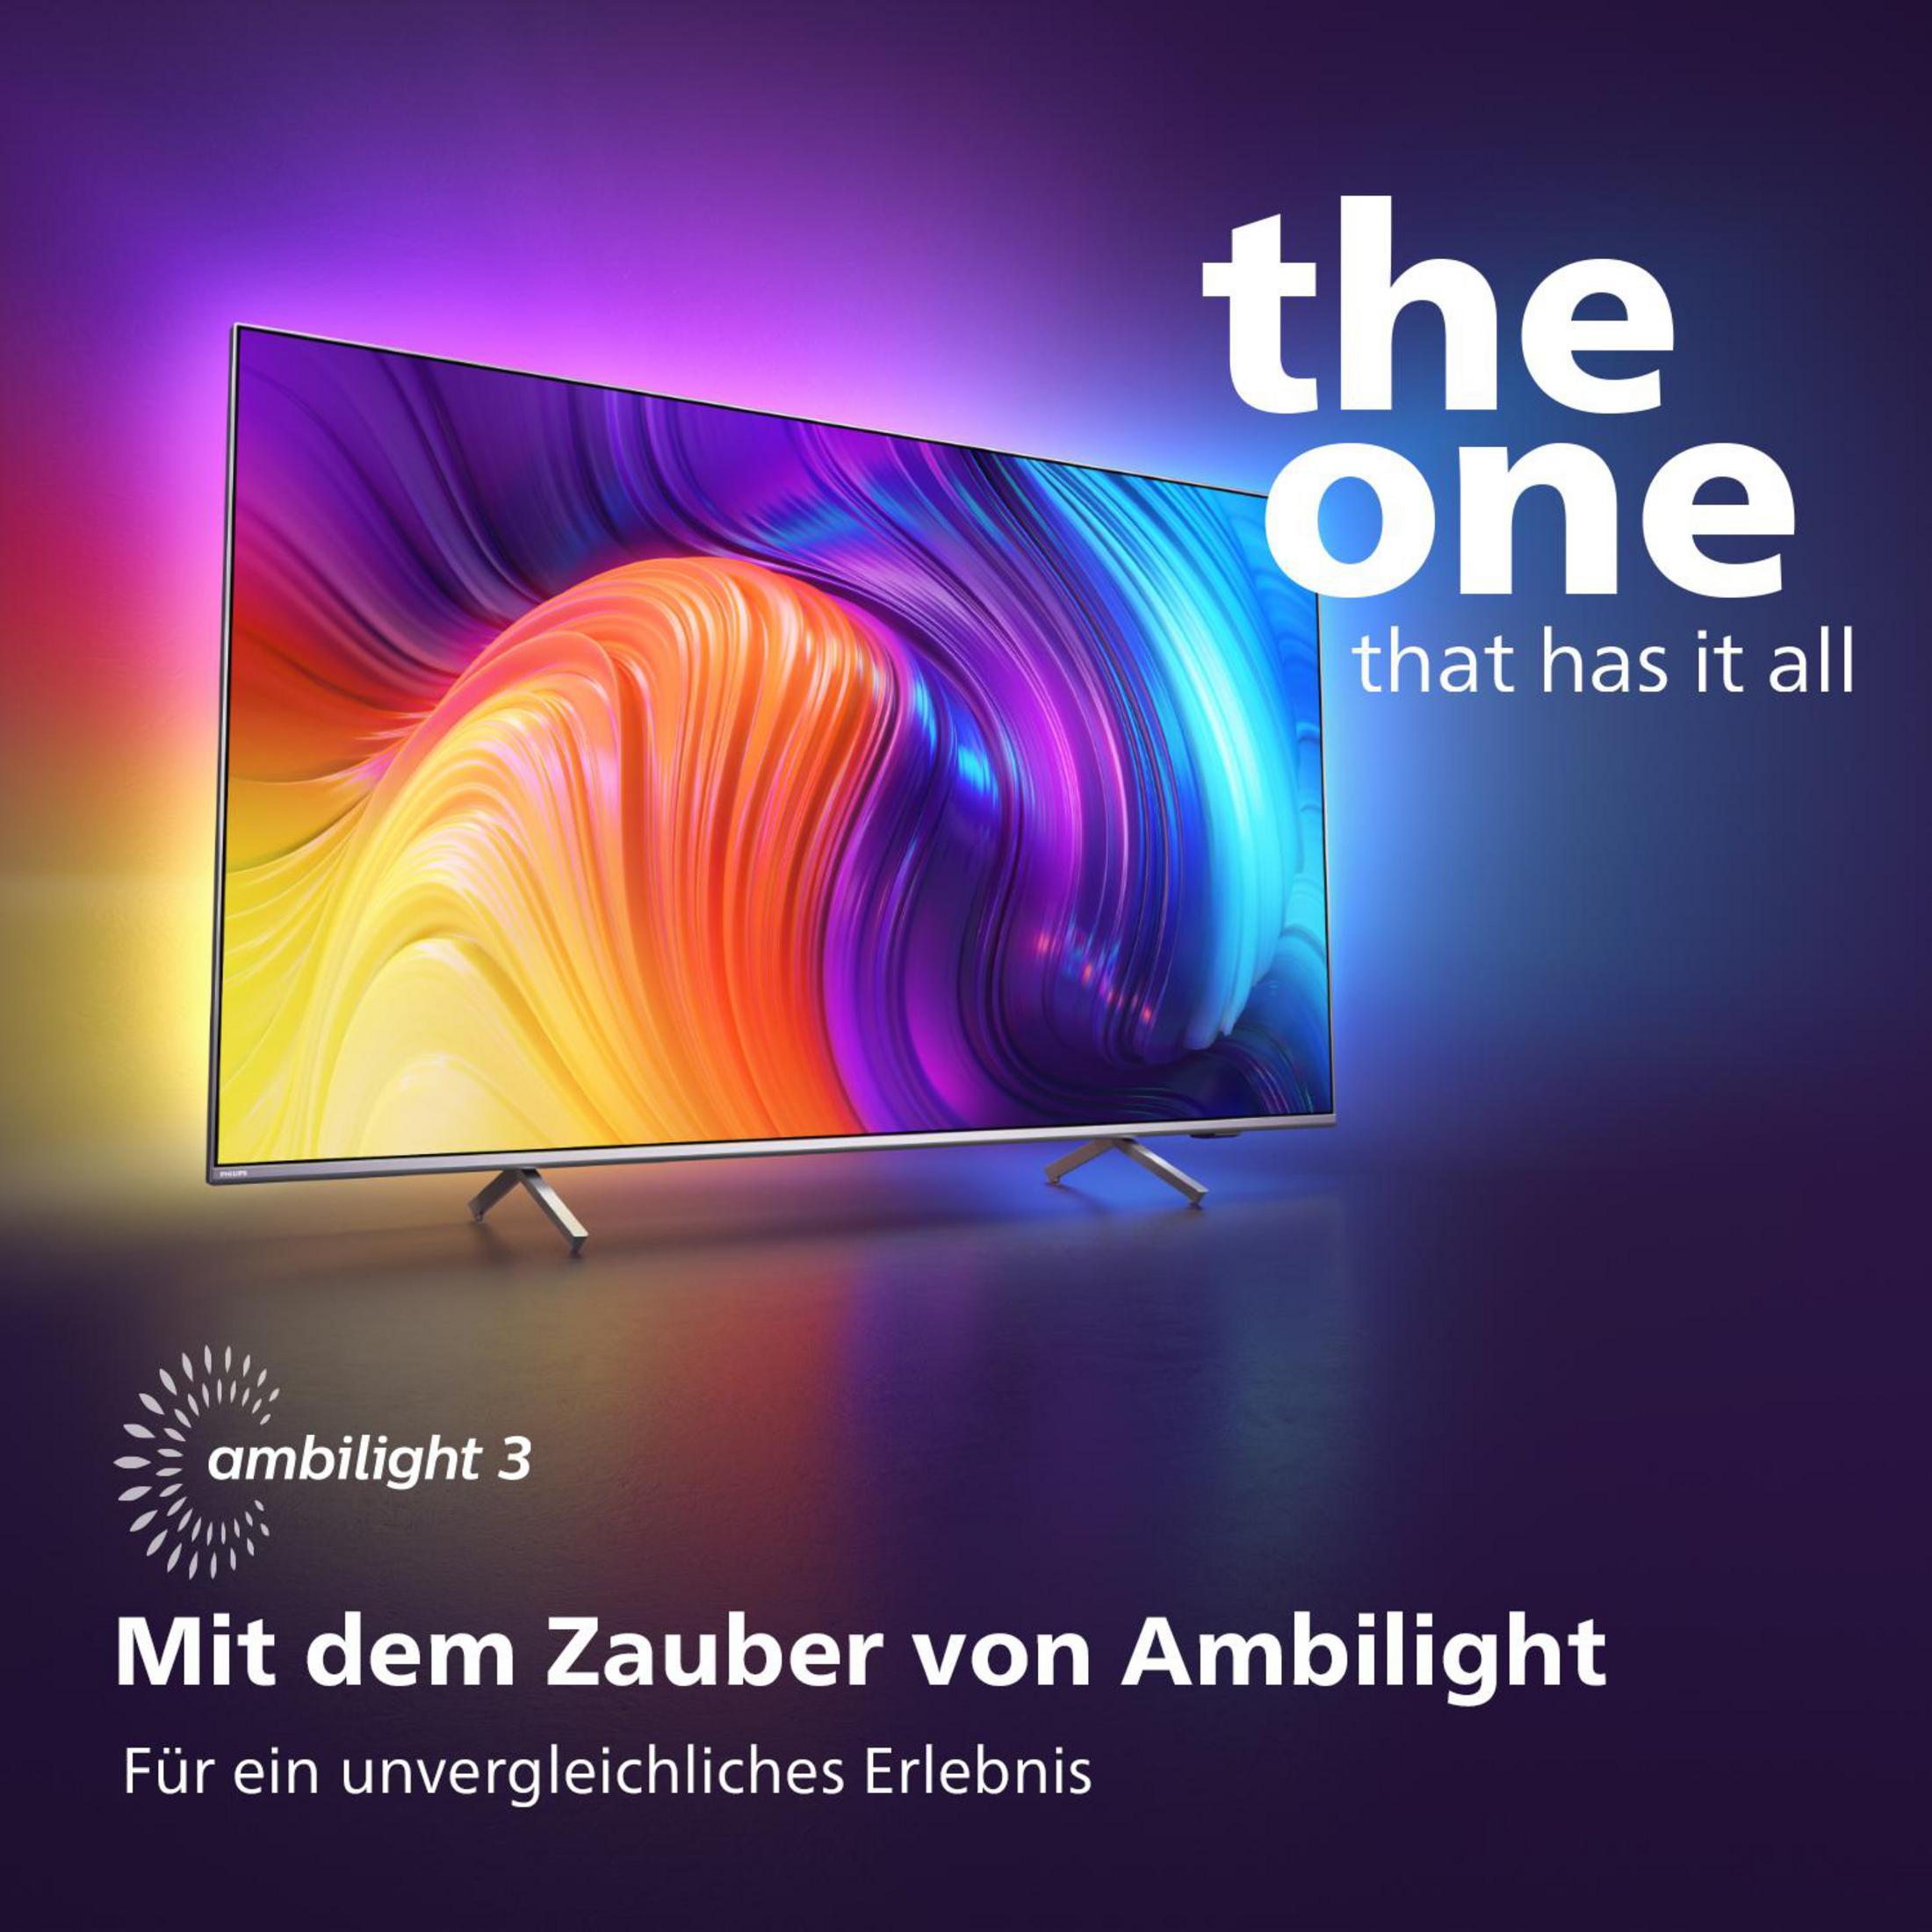 PHILIPS 43 PUS 8507/12 LED TV / 109,22 (R)) Zoll Android Ambilight, (Flat, UHD 11 cm, TV™ 4K, 43